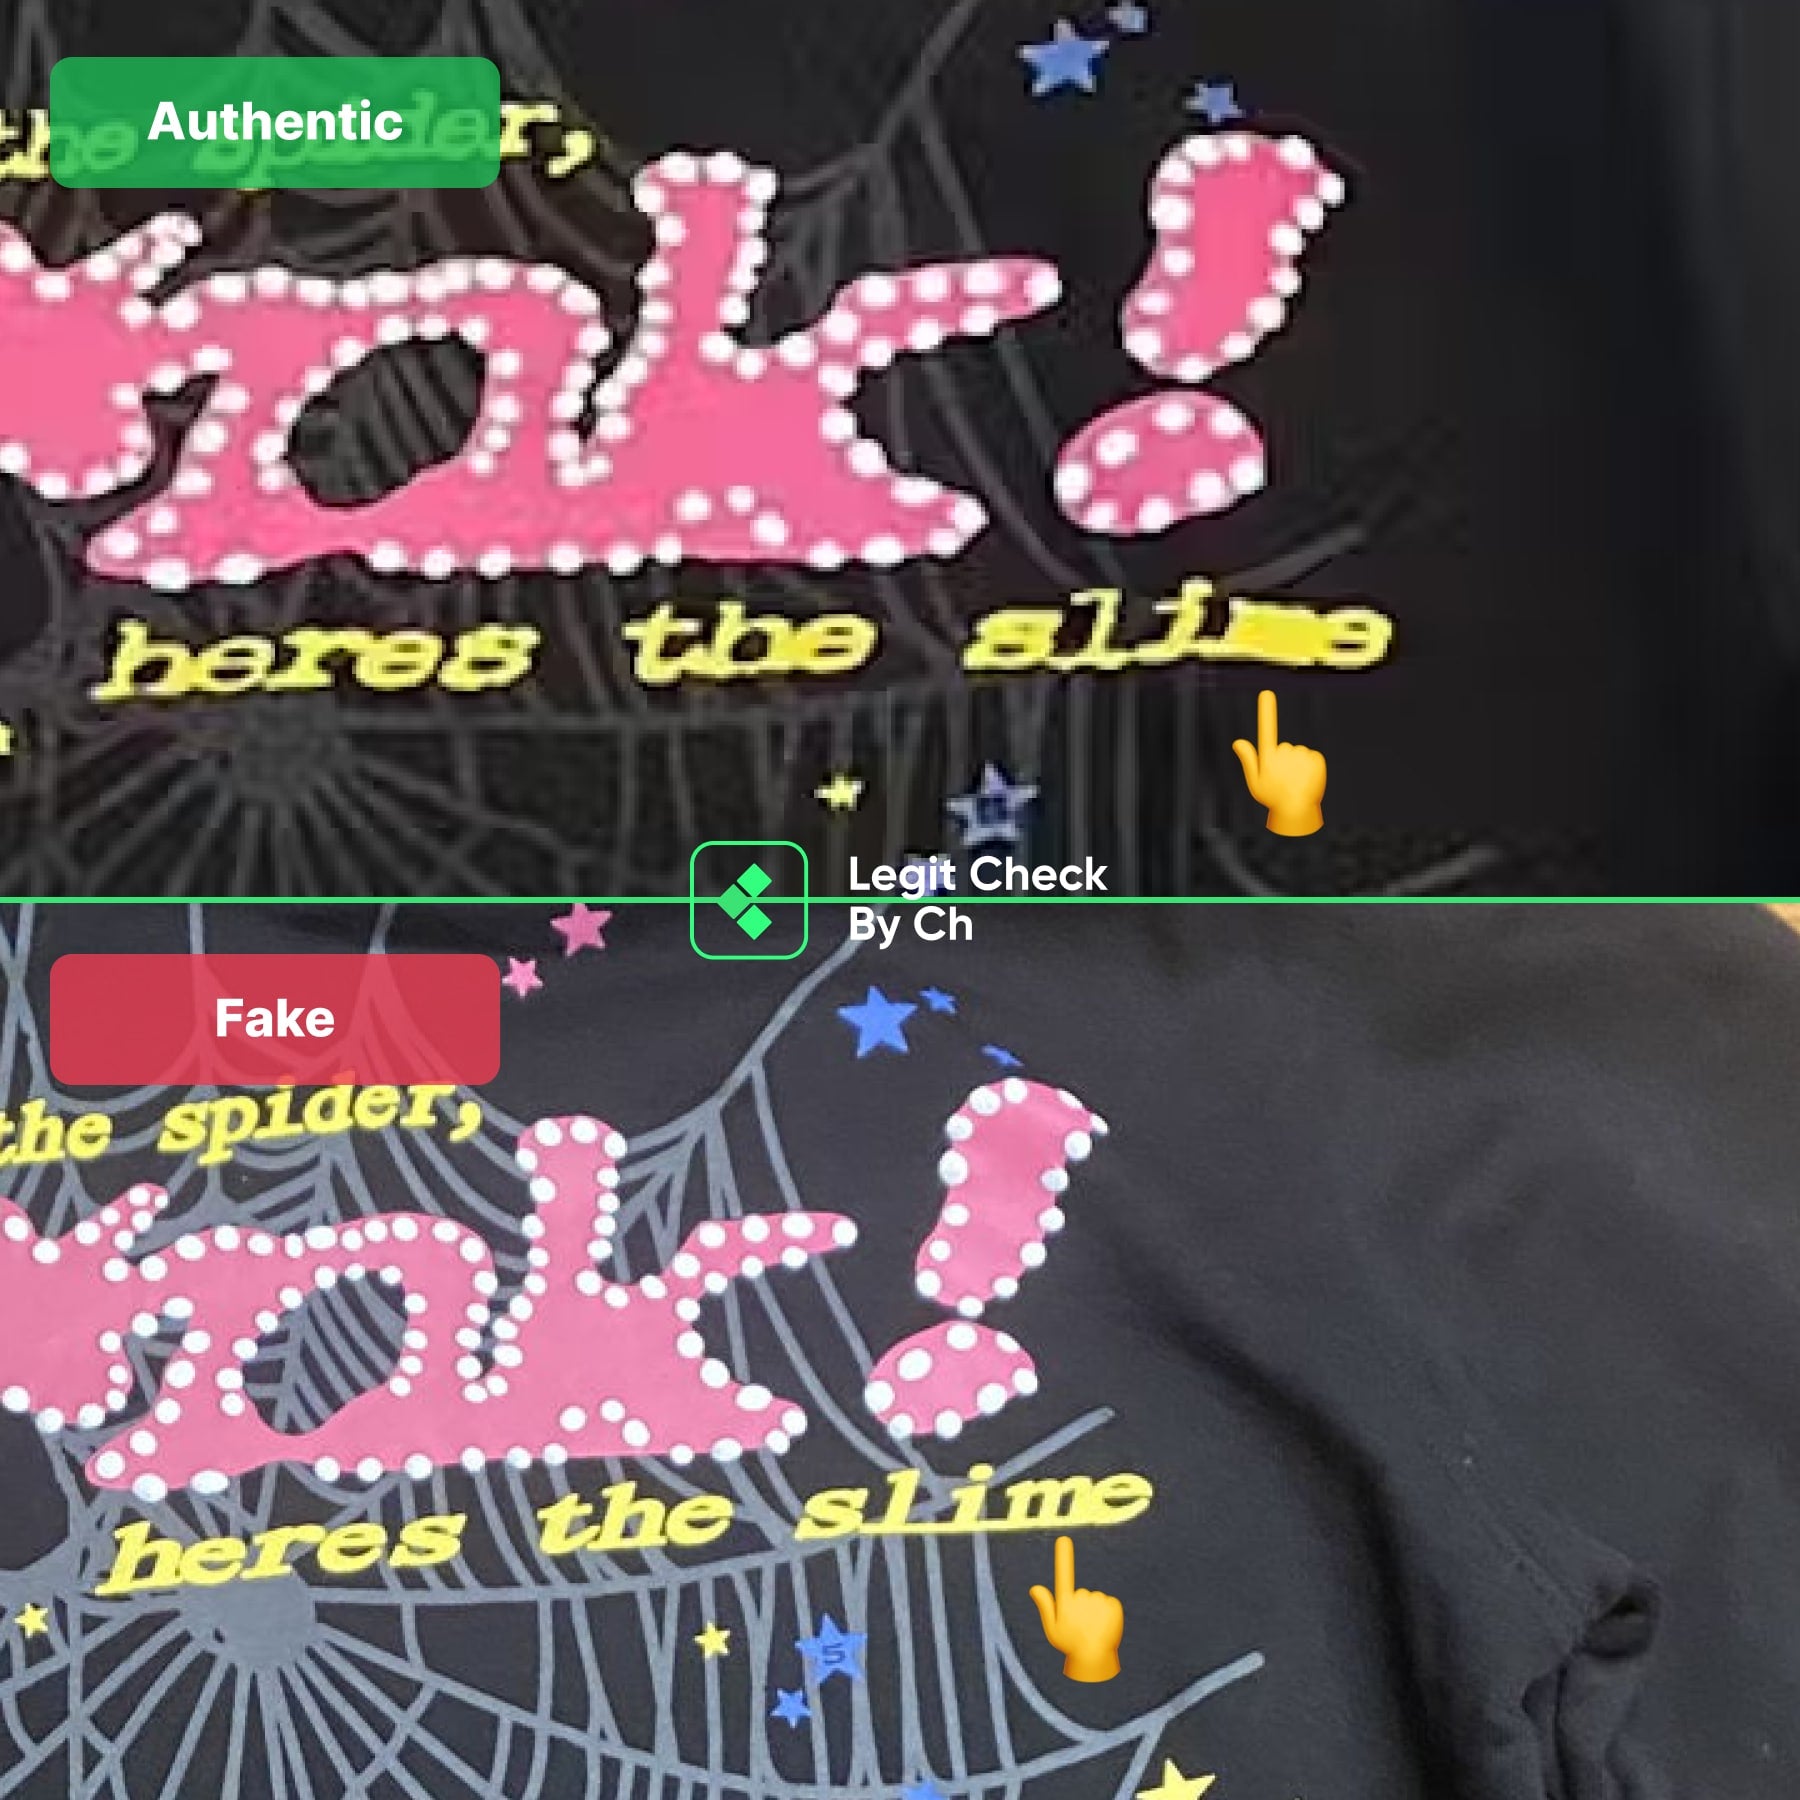 How To Tell If A Spider Hoodie Is Fake?